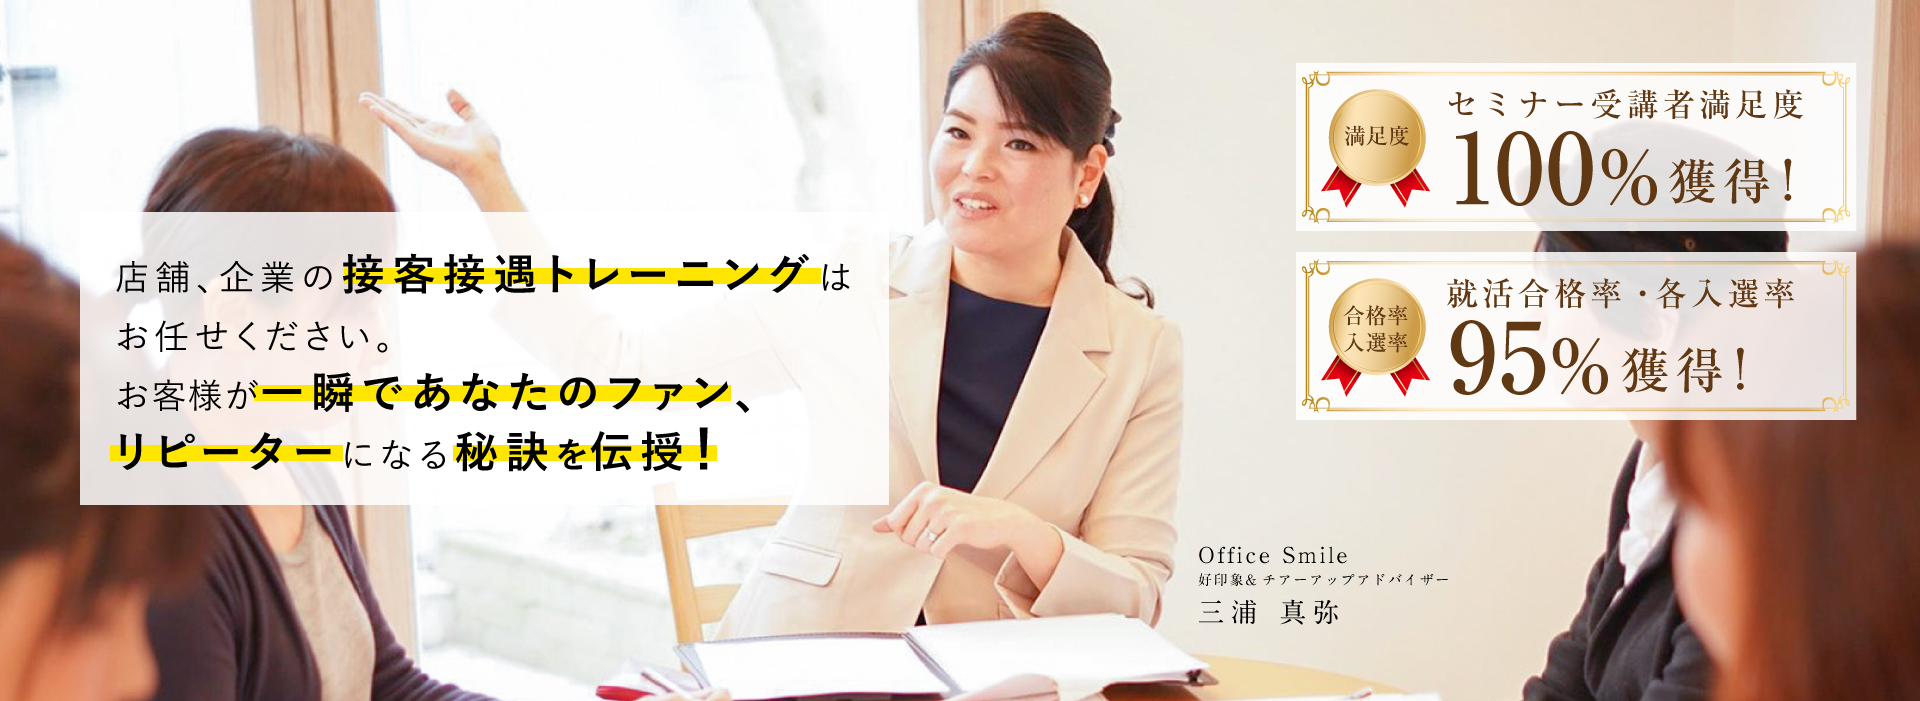 Office Smile